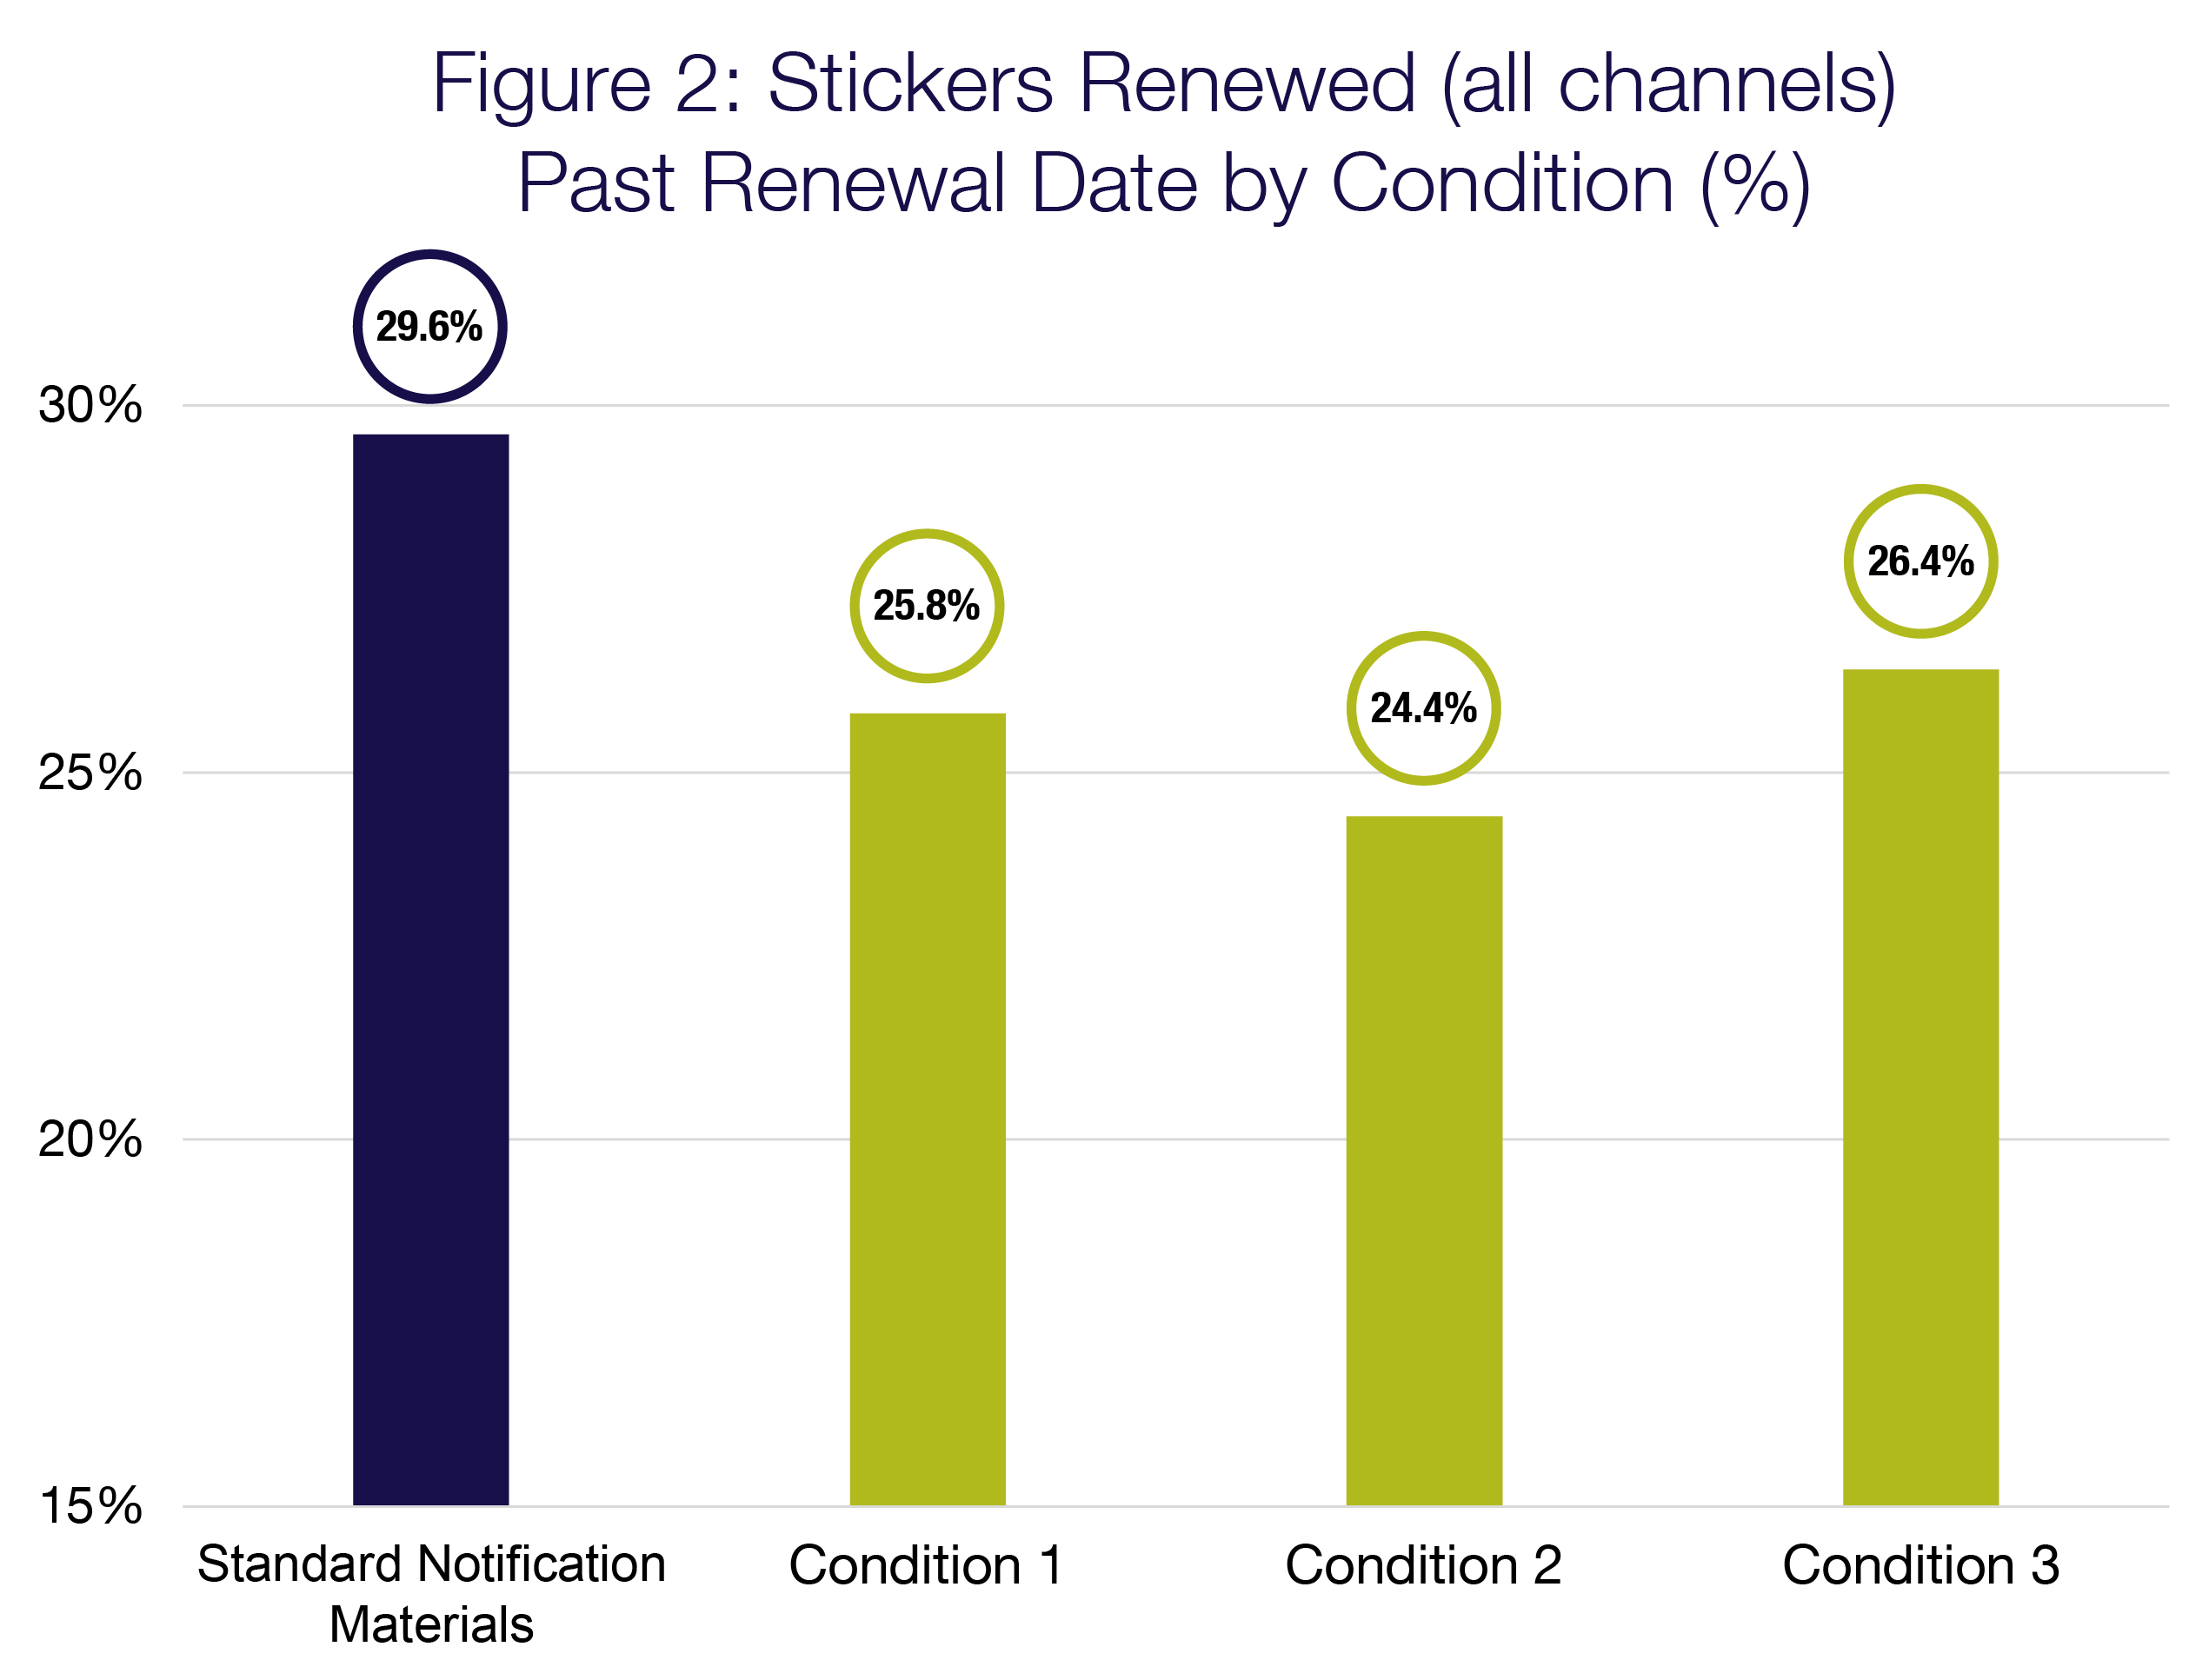 Bar graph depicting the percent of licence plate stickers renewed late by condition. Standard notification = 29.6%. Condition 1 = 25.8%. Condition 2 = 24.4%. Condition 3 = 26.4%.